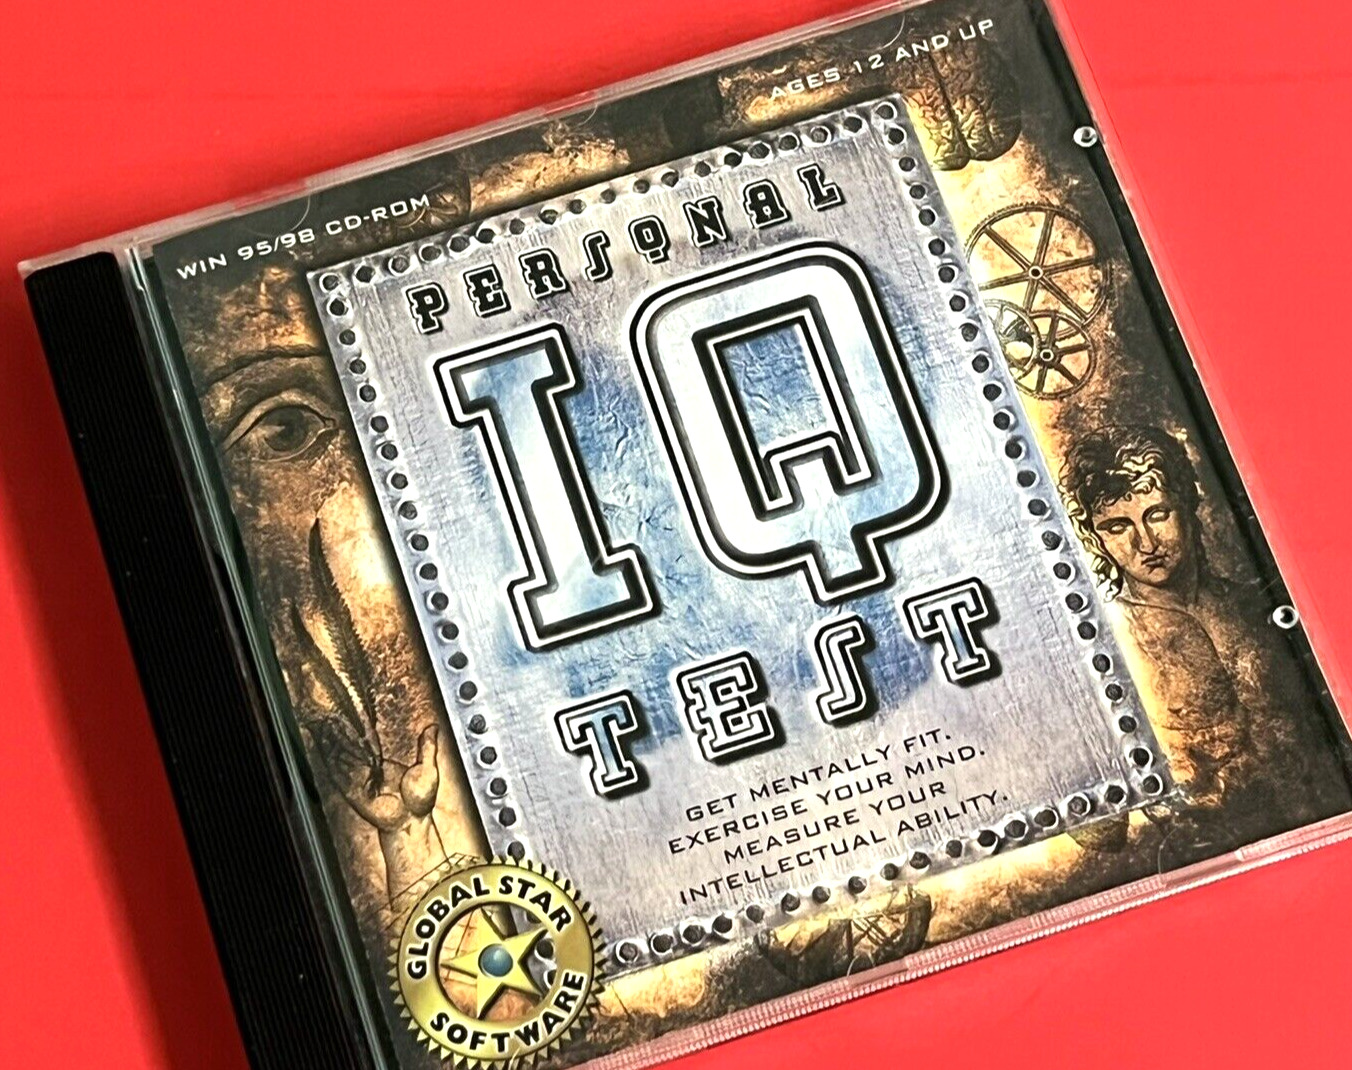 1995 Personal IQ Test CD ROM Get Mentally Fit Exercise Your Mind Measure Your IQ